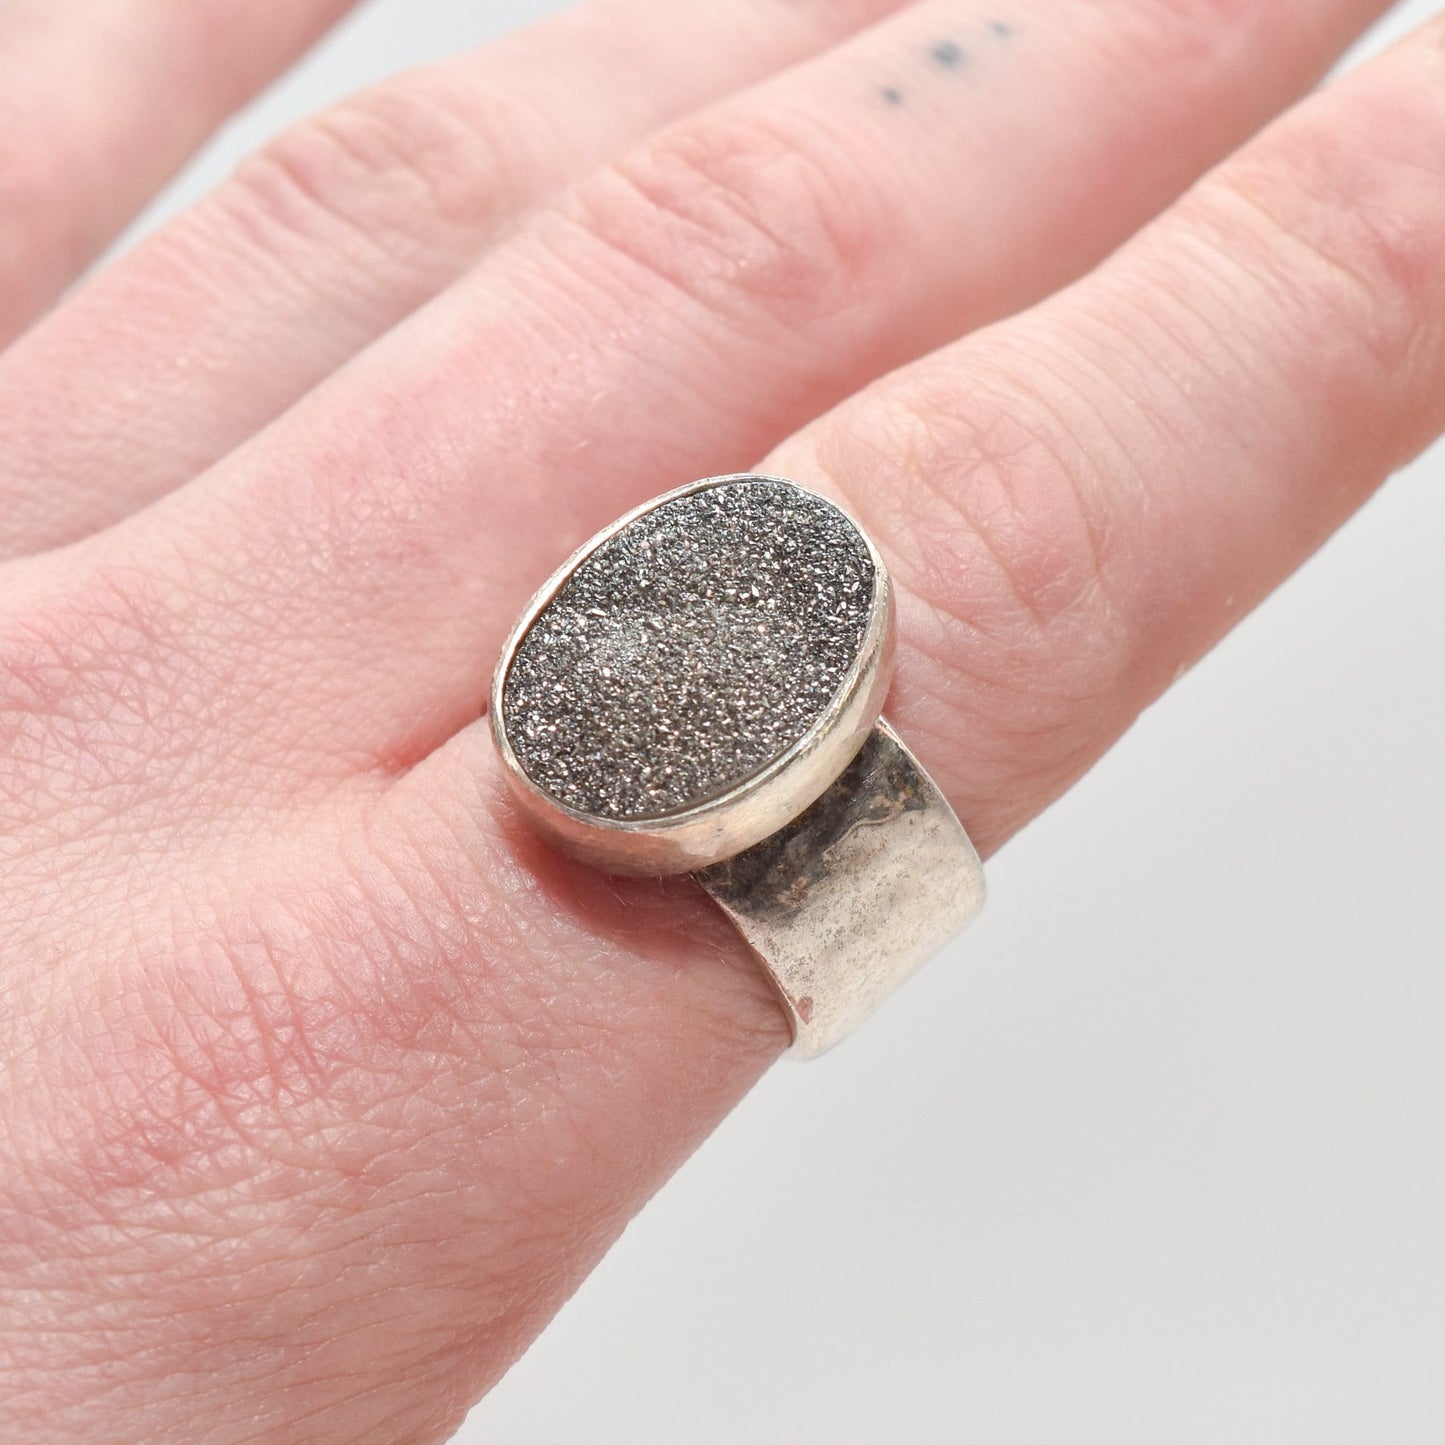 Sparkly Sterling Silver Druzy Quartz Ring, Chunky Hammered Ring, Gemstone Jewelry, Size 10 1/4 US